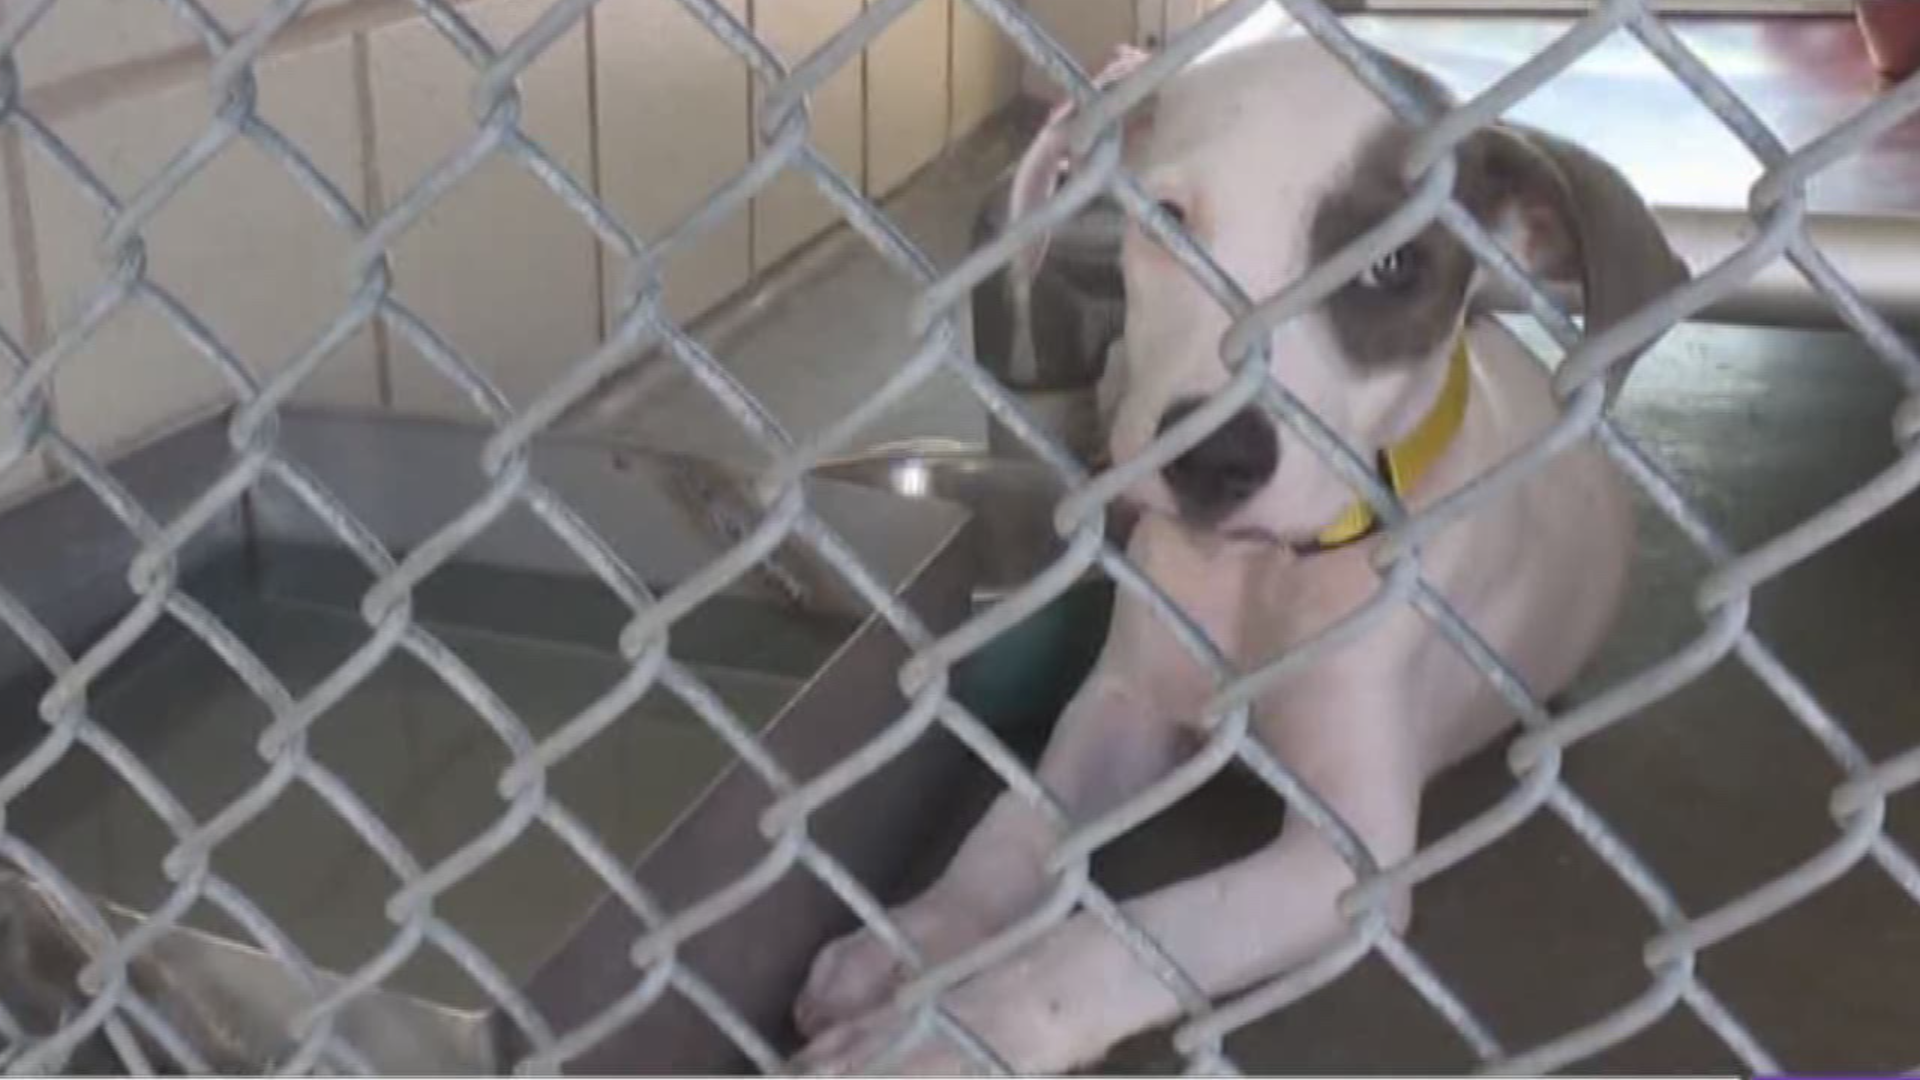 The City of Corpus Christi's Animal Care Services Department is stepping up to bring attention to Suicide Prevention Month by partnering with the Corpus Christi Vet Center to put on a special animal adoption event called Pets for Vets.